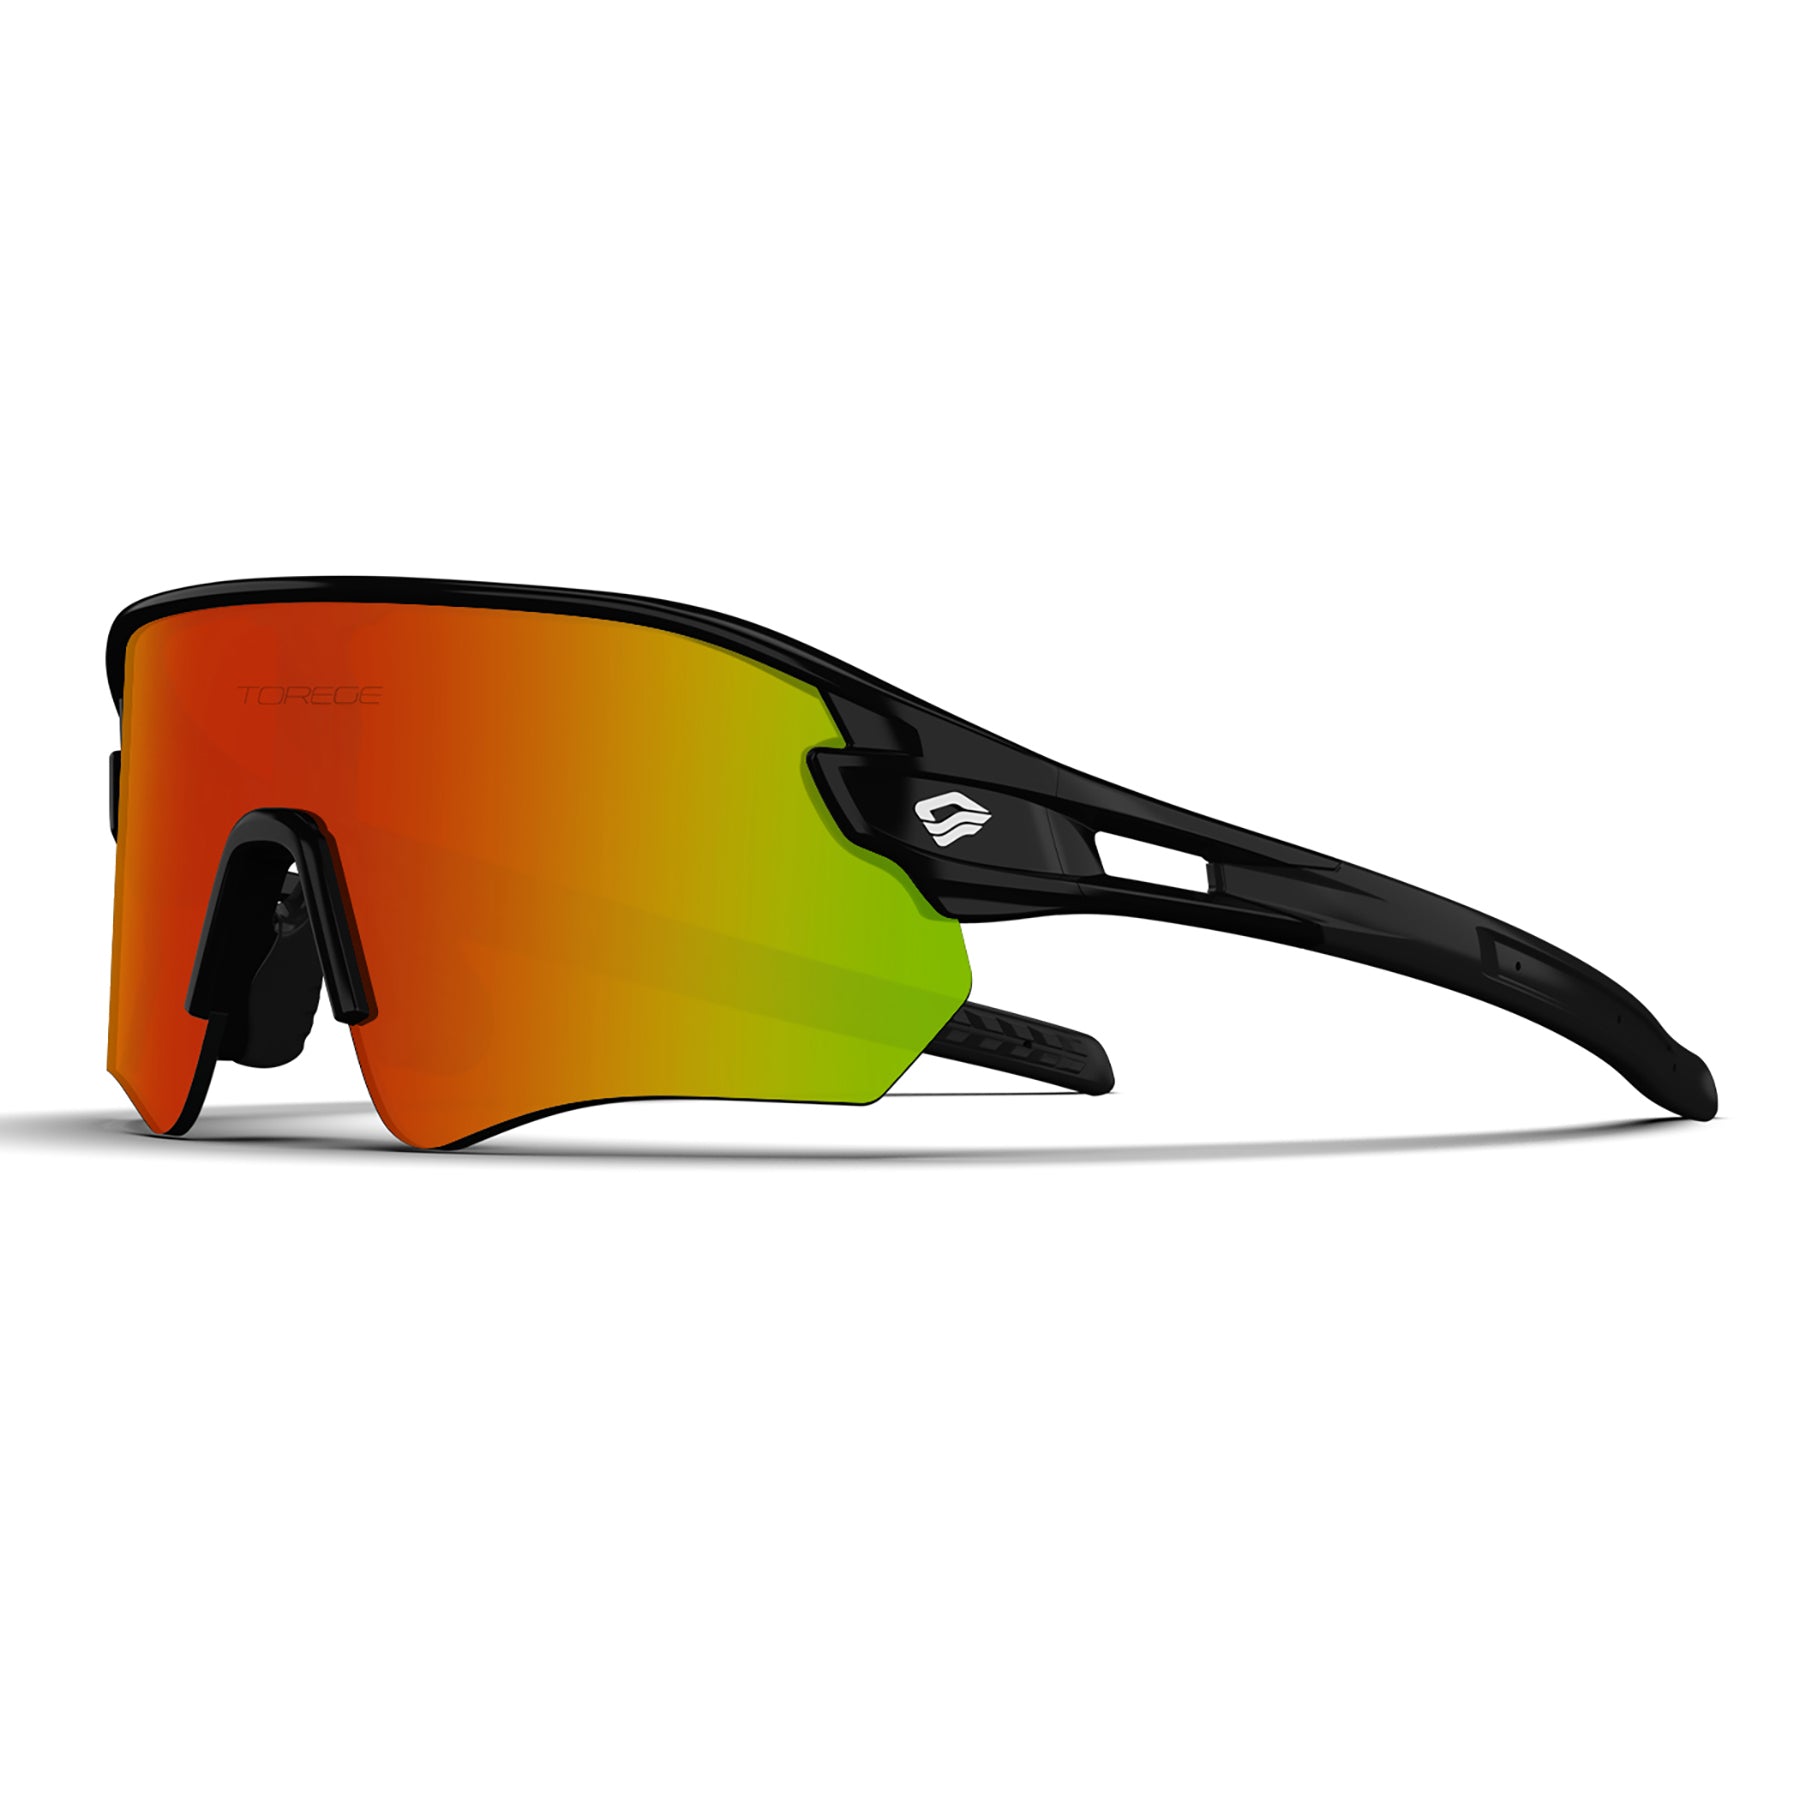 Wild Heart Ultra Lightweight Sports Sunglasses for Men & Women with Lifetime Warranty - Ideal for Cycling, Hiking, Fishing, Golf & Running - Black